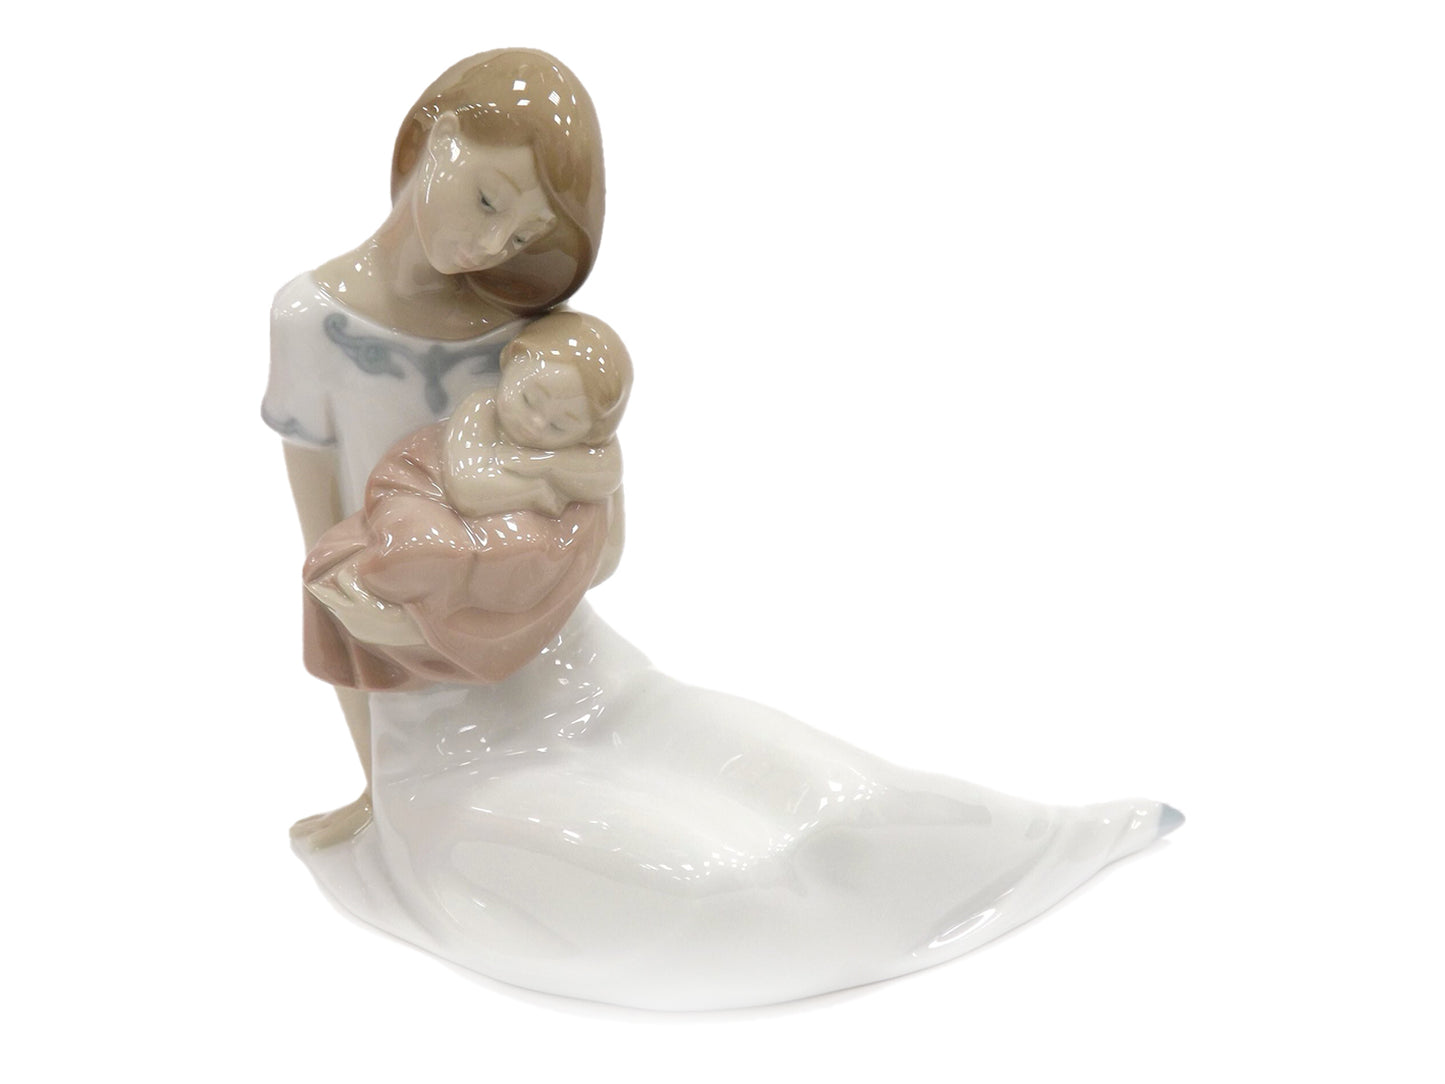 Nao porcelain figurine of a mother holding her baby